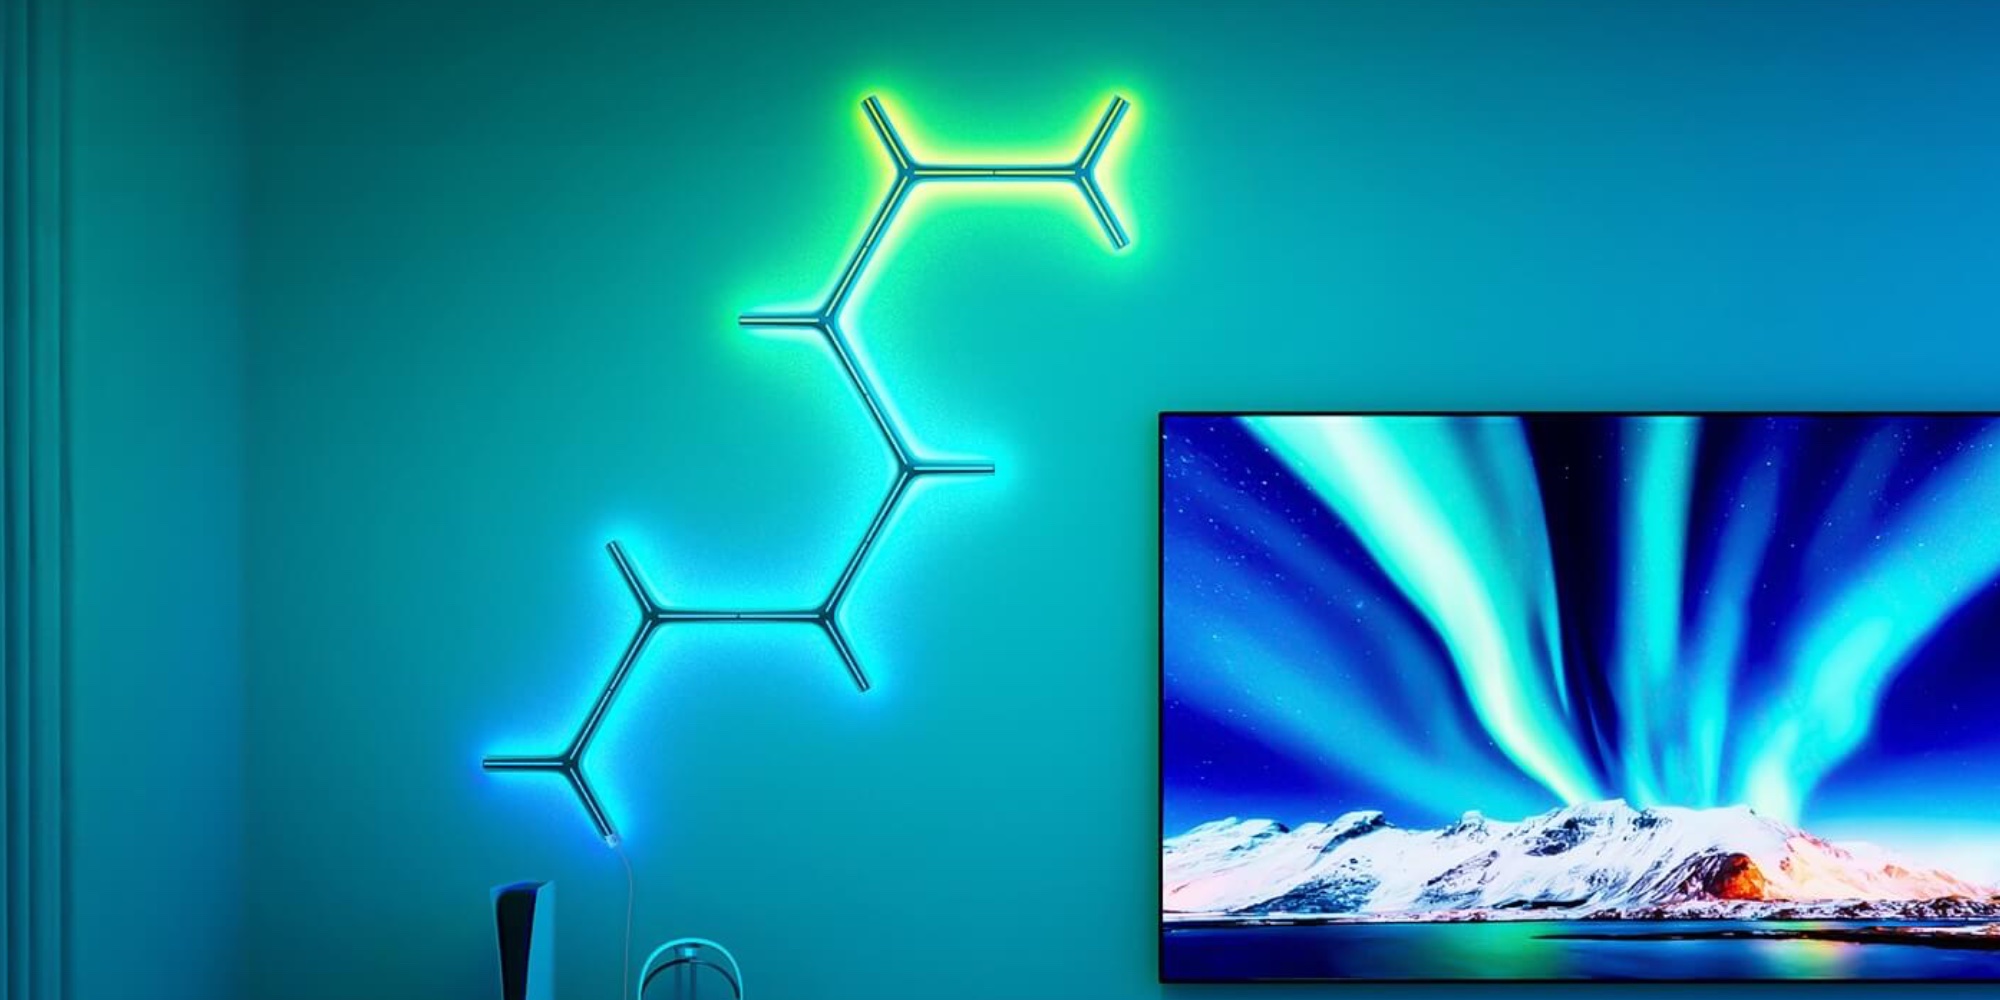 Govee's dual-lens, TV-syncing backlight now fits even bigger TVs